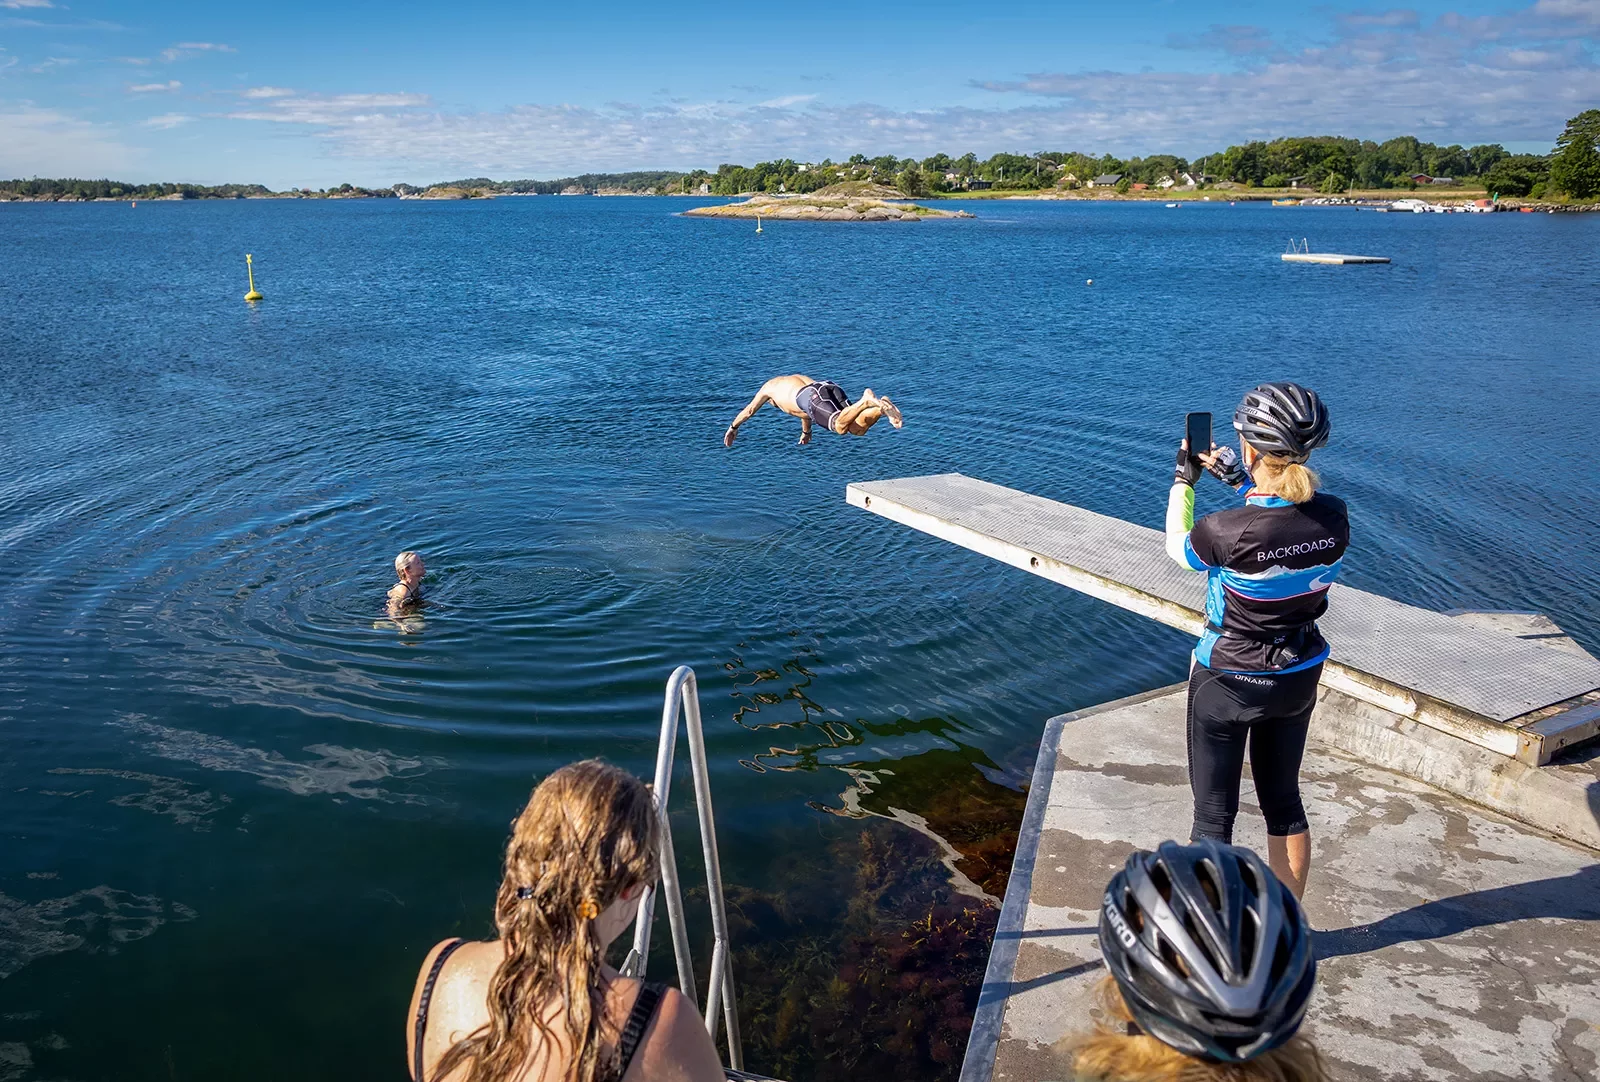 Guests diving into a river in Norway